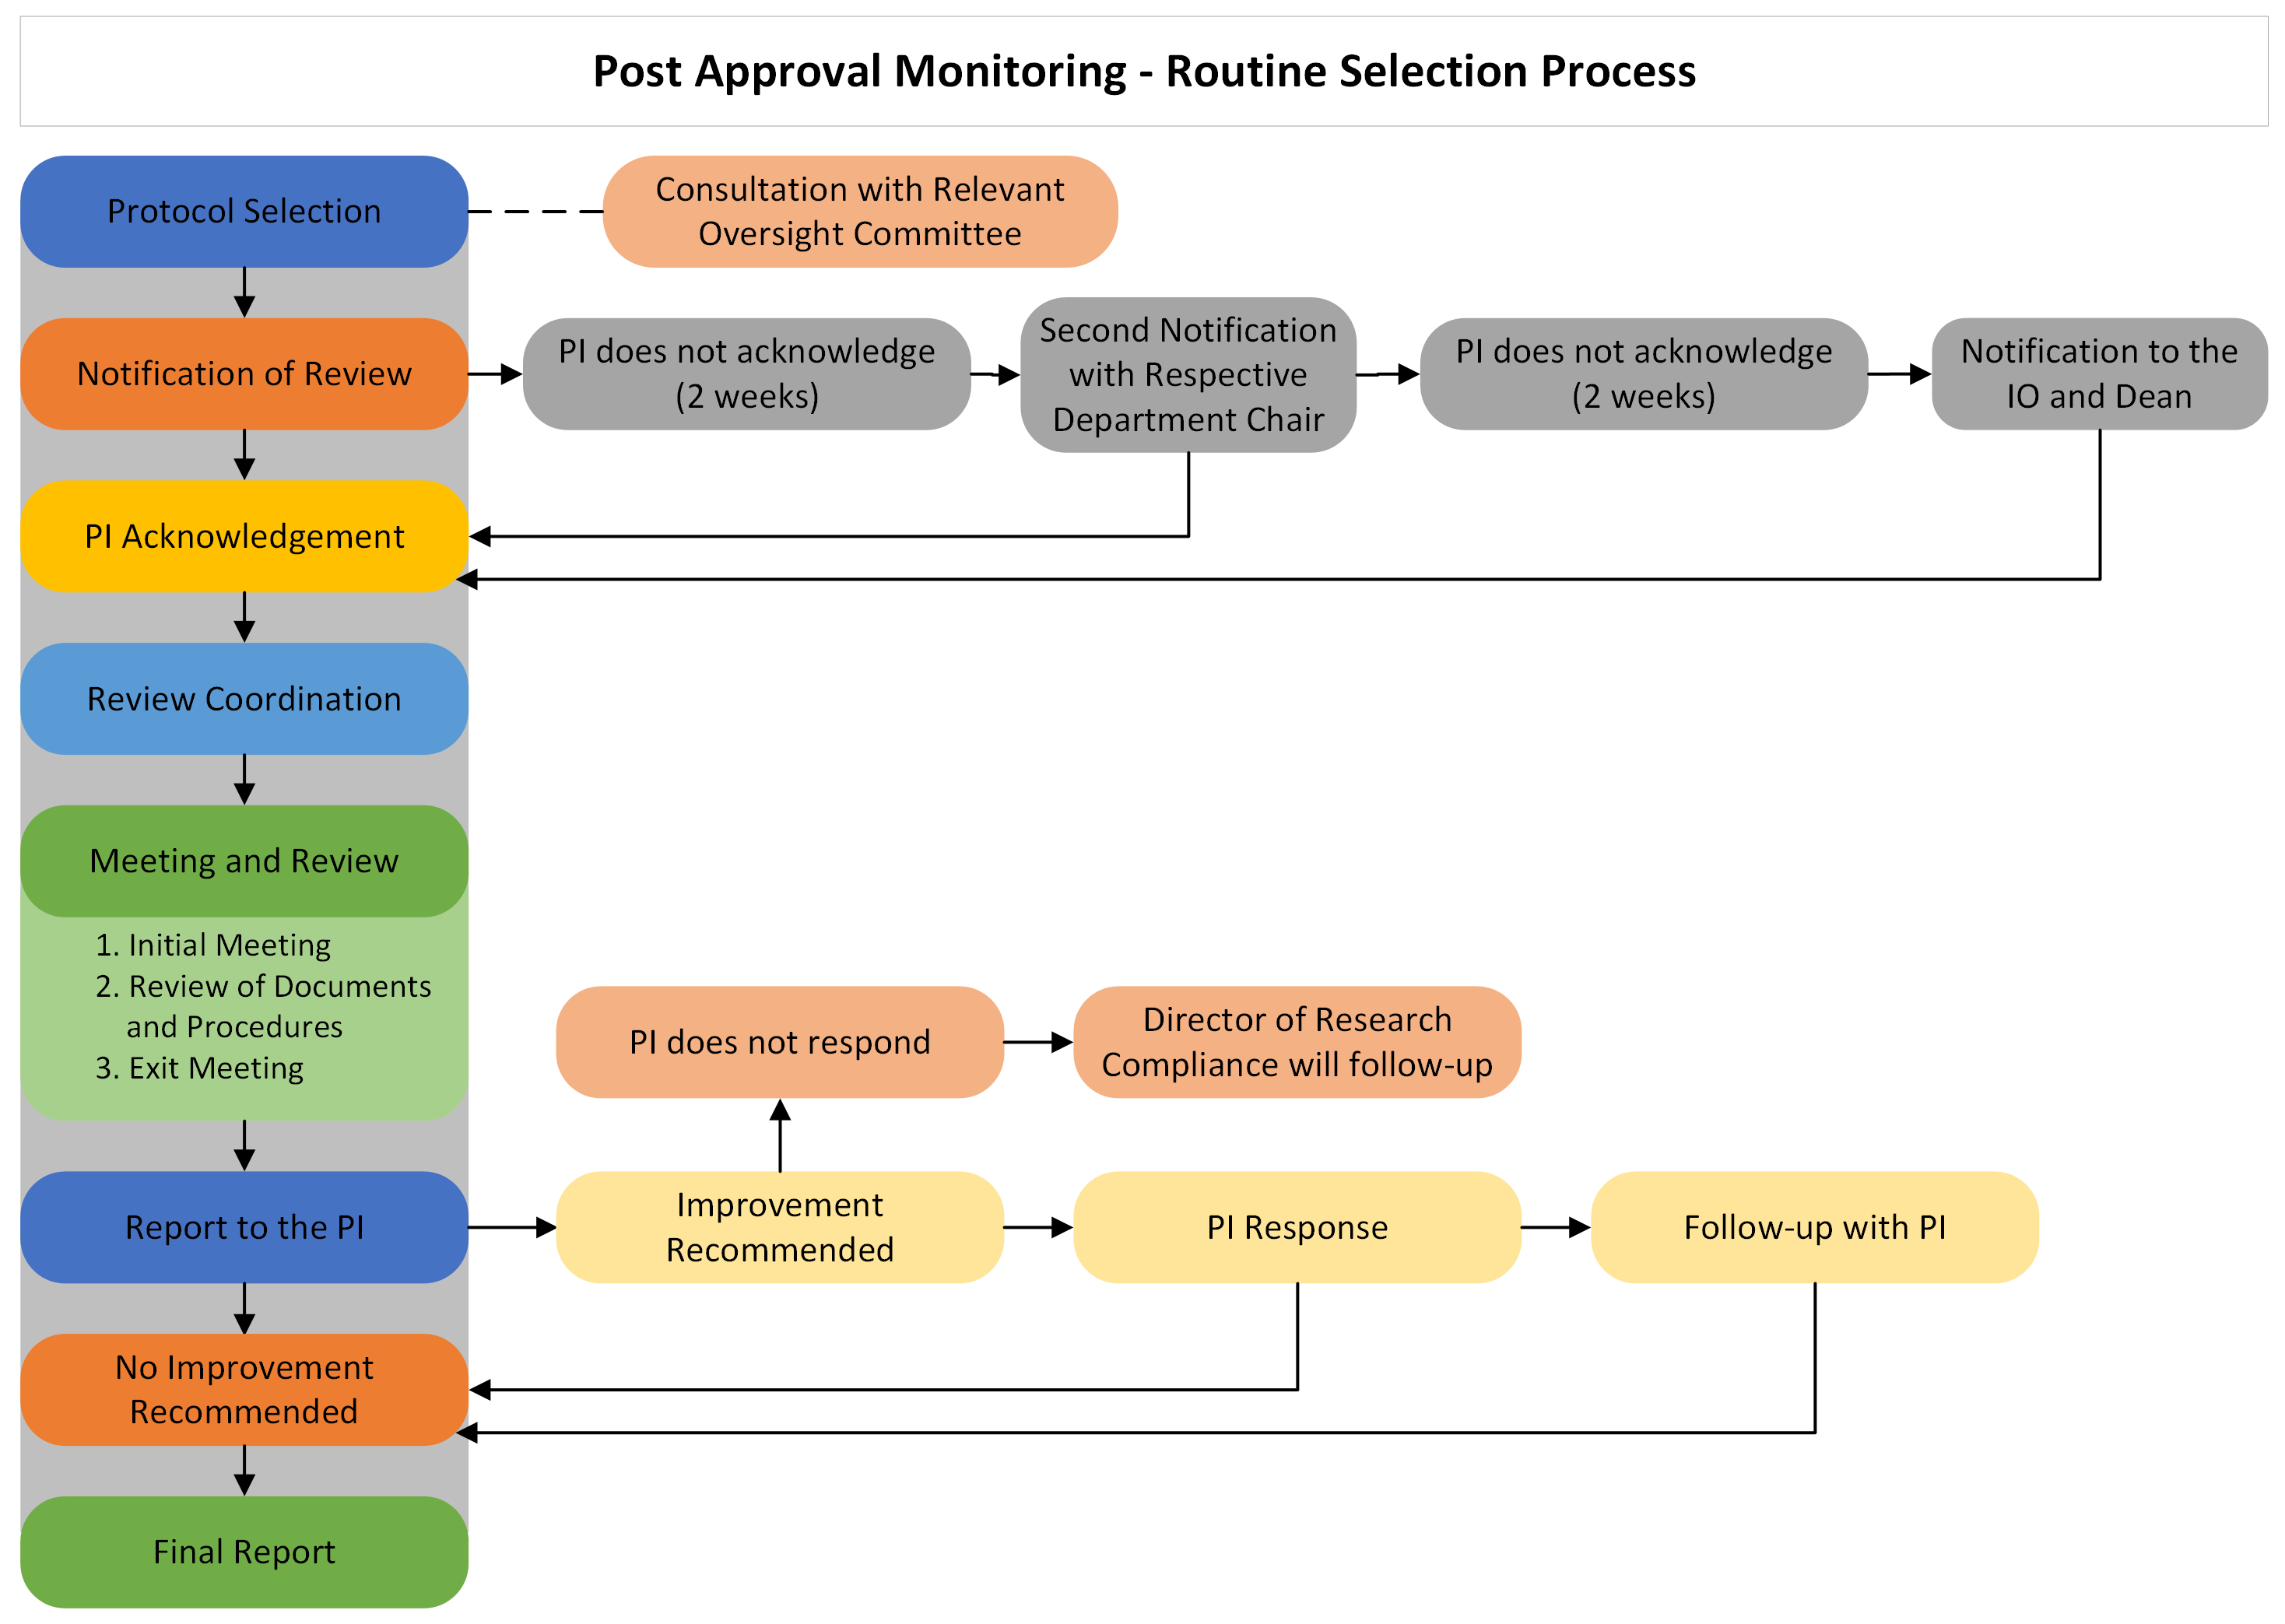 Post Approval Monitoring Process